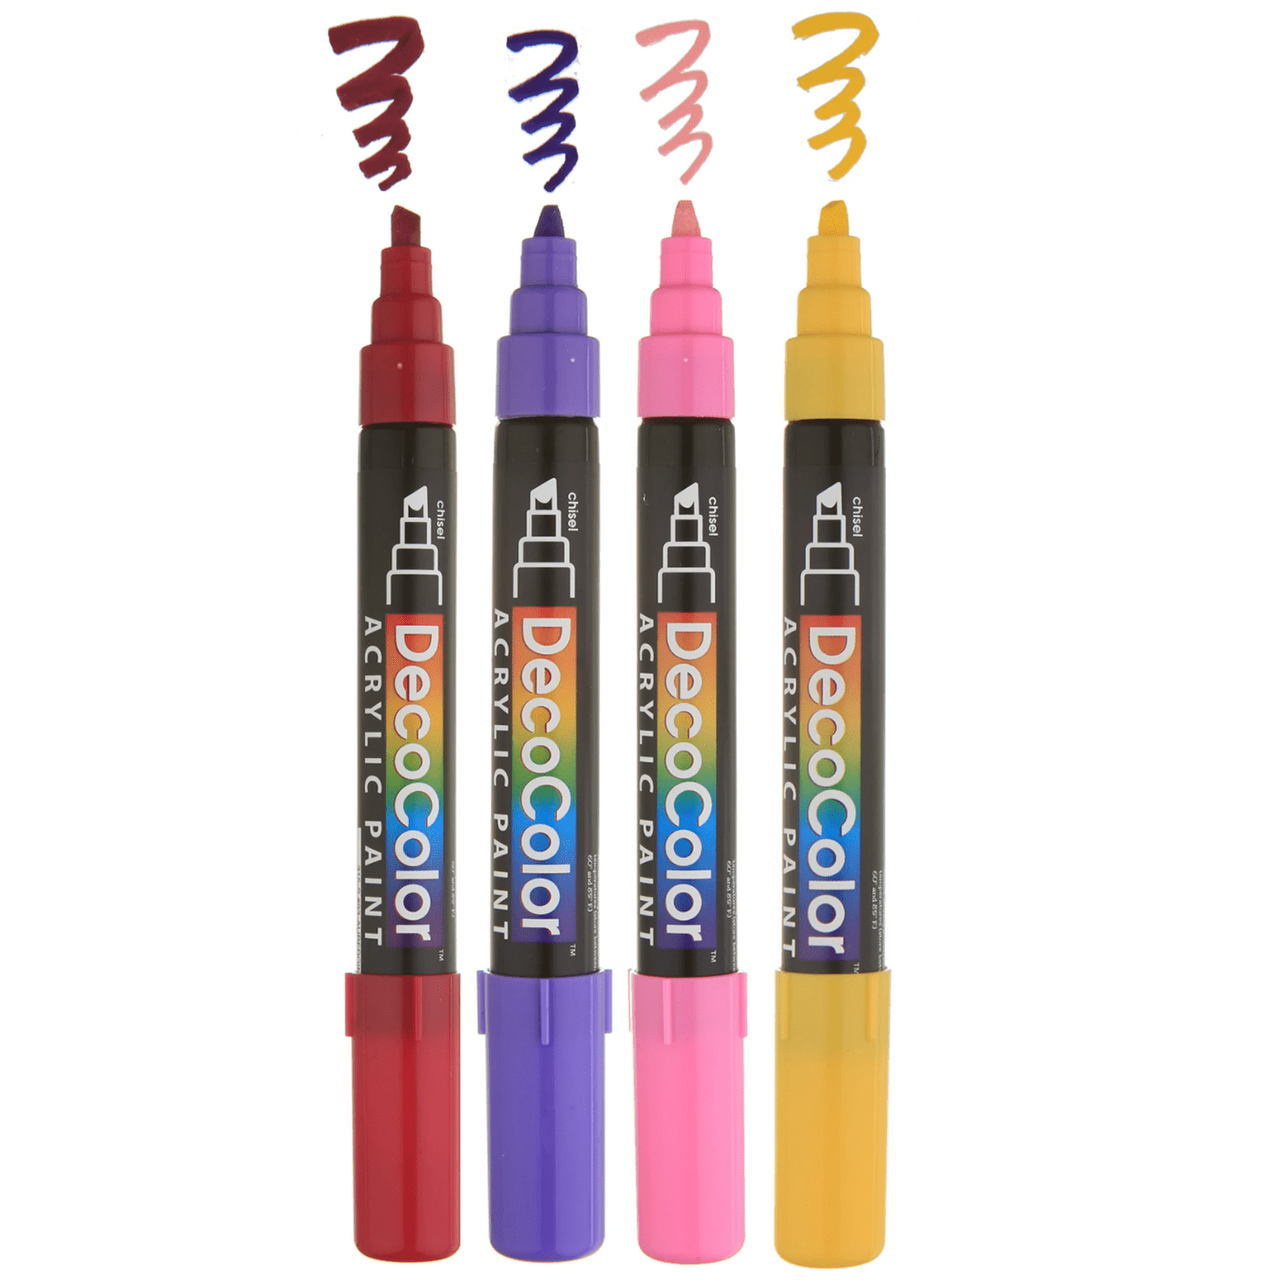 https://cdn11.bigcommerce.com/s-76f8tigafr/images/stencil/1280x1280/products/7897/11741/decocolor-acrylic-chisel-marker-set-of-4-bright-colors-3__12931.1660261266.png?c=1